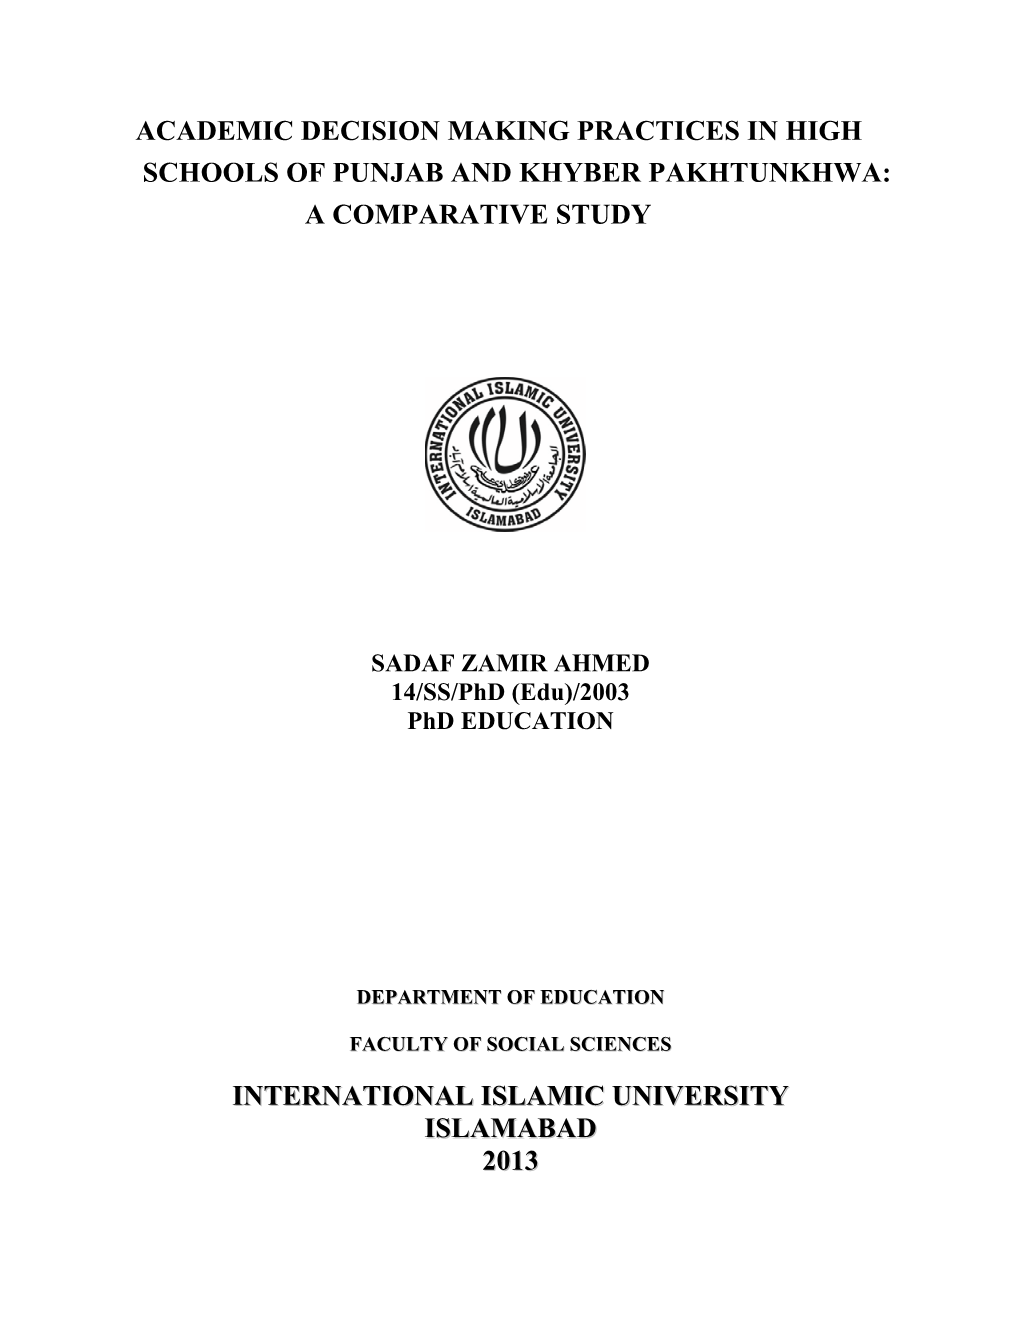 Academic Decision Making Practices in High Schools of Punjab and Khyber Pakhtunkhwa: a Comparative Study